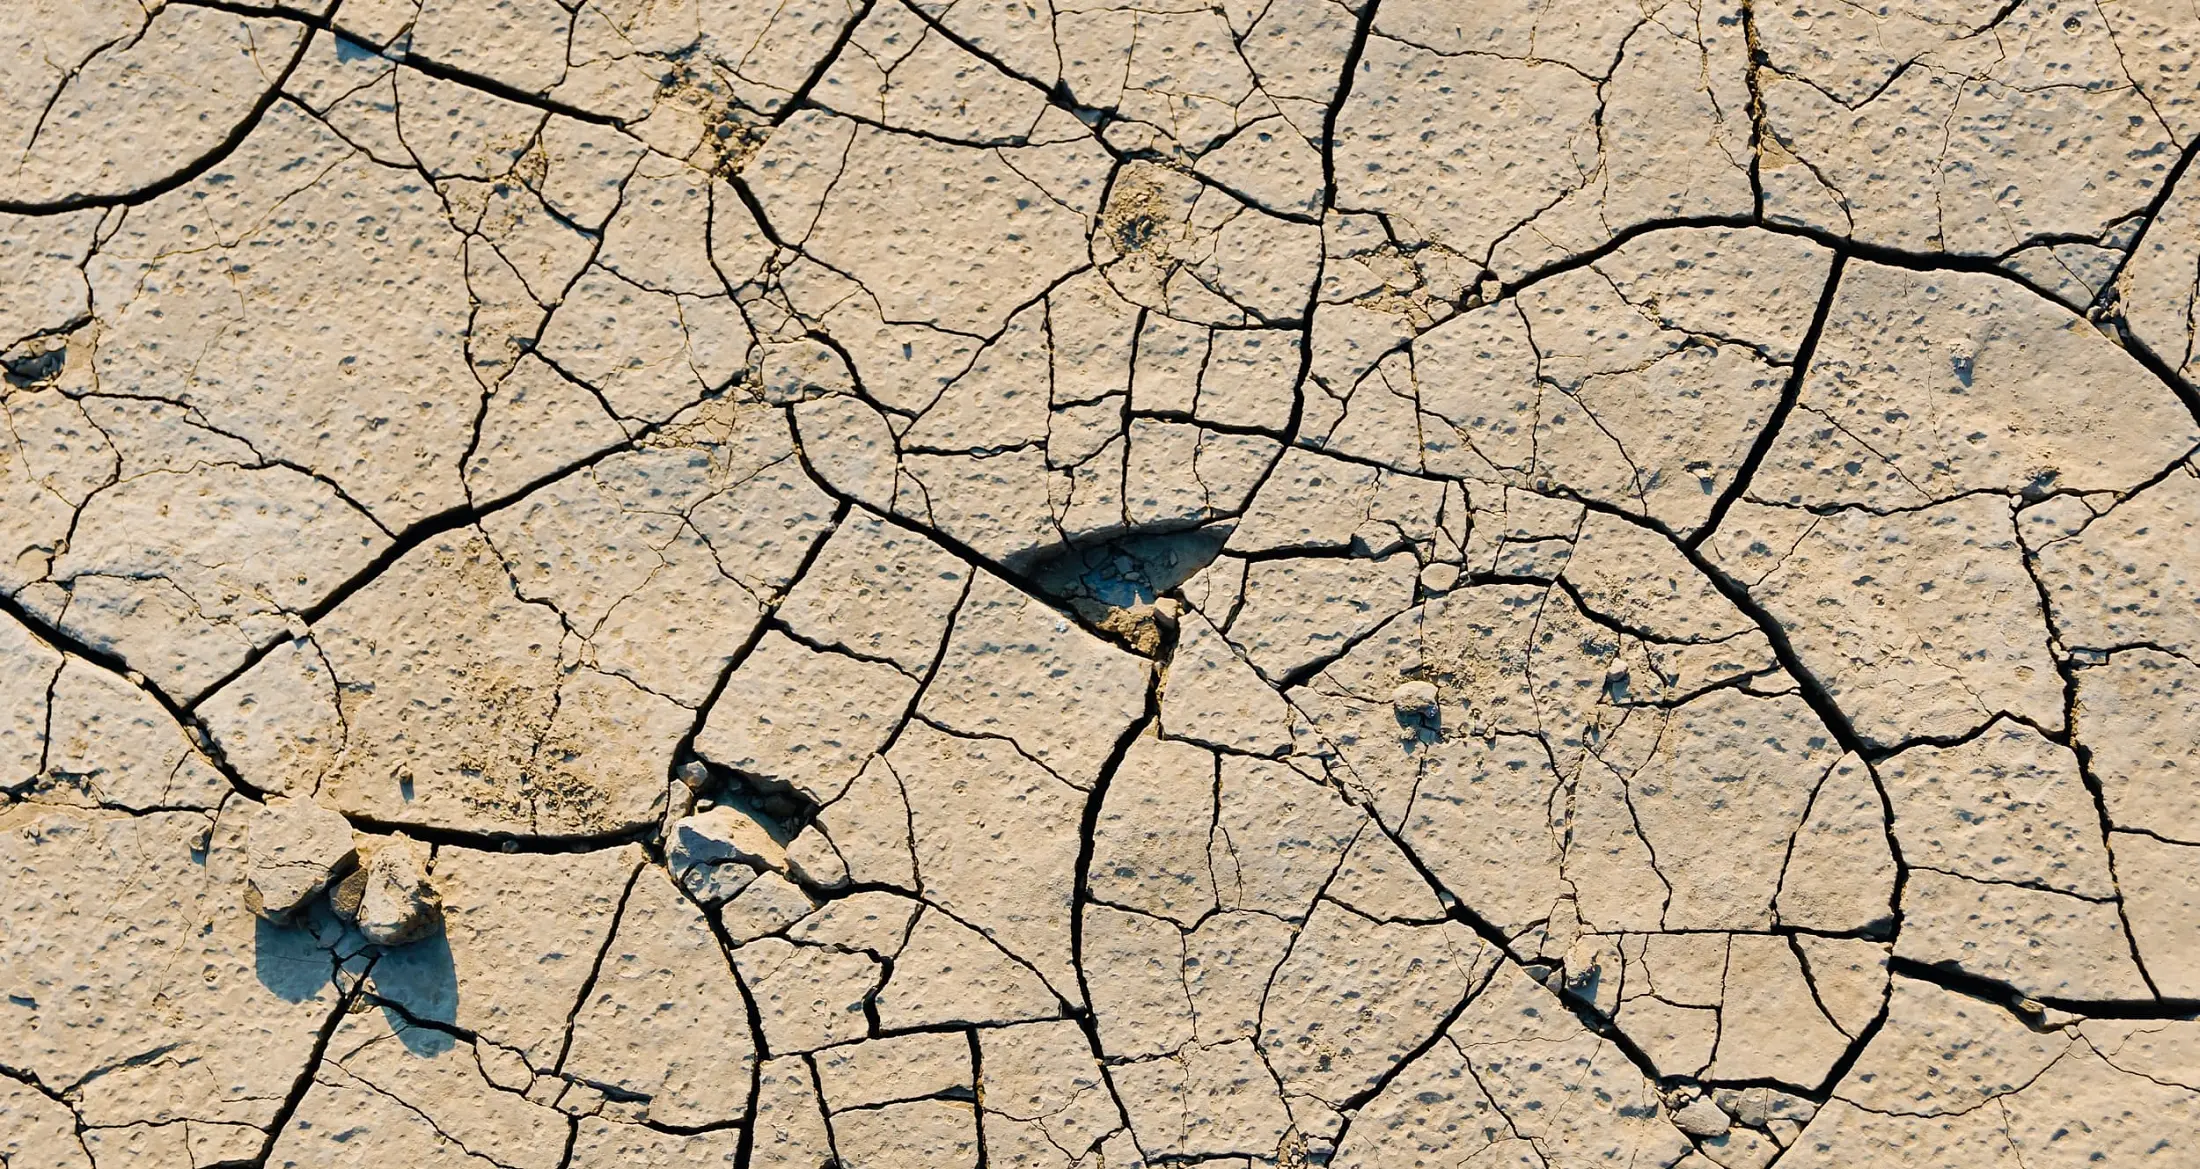 Global Drought Information System